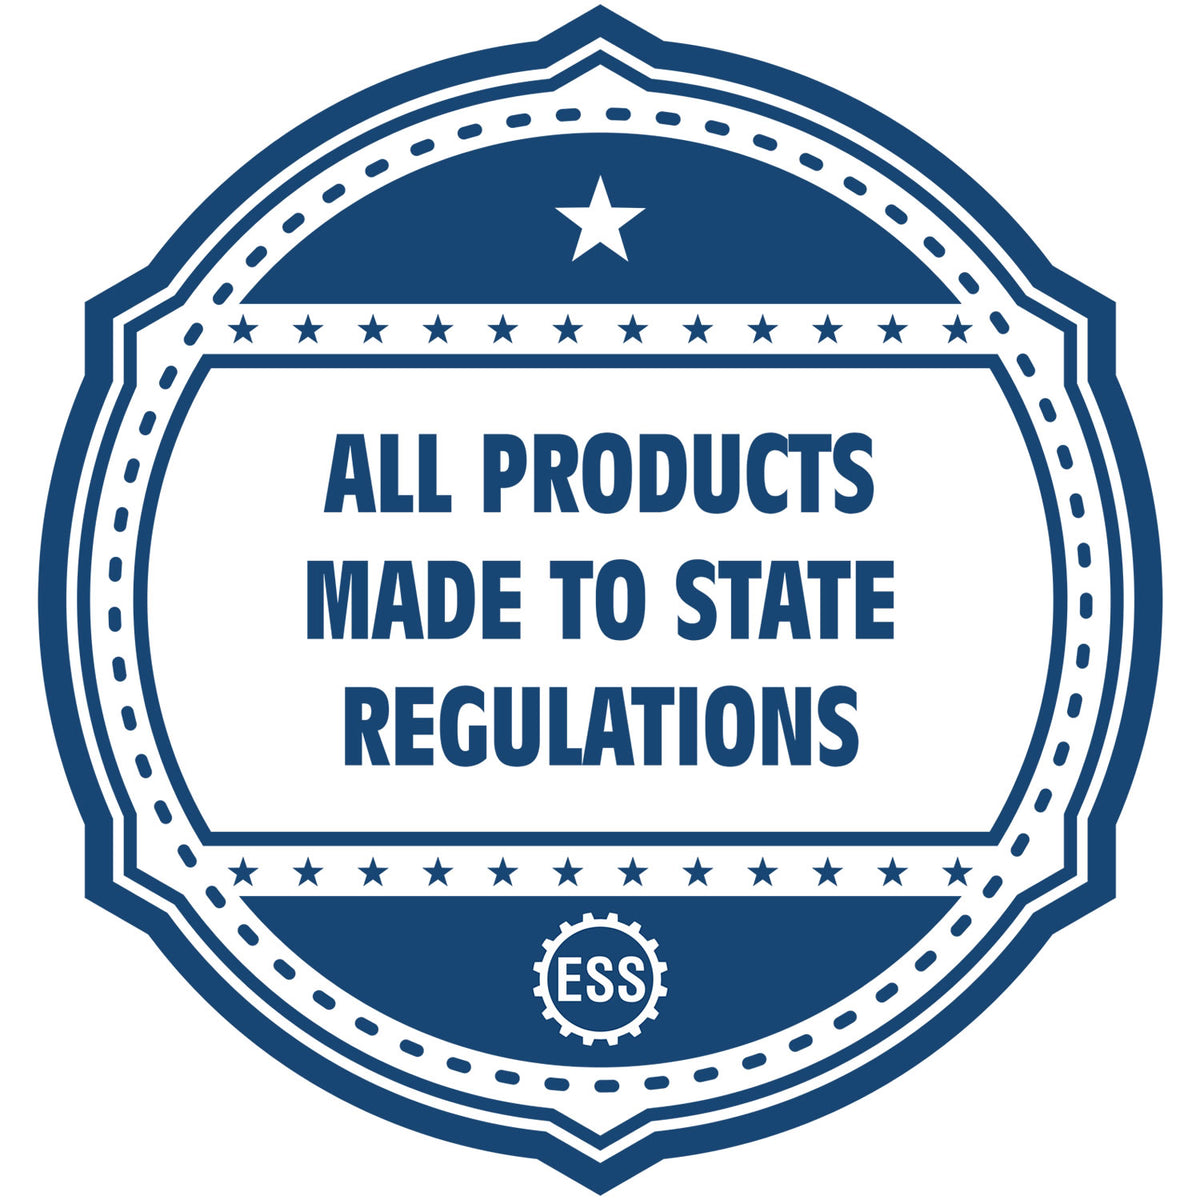 A blue icon or badge for the Gift Connecticut Architect Seal showing that this product is made in compliance with state regulations.